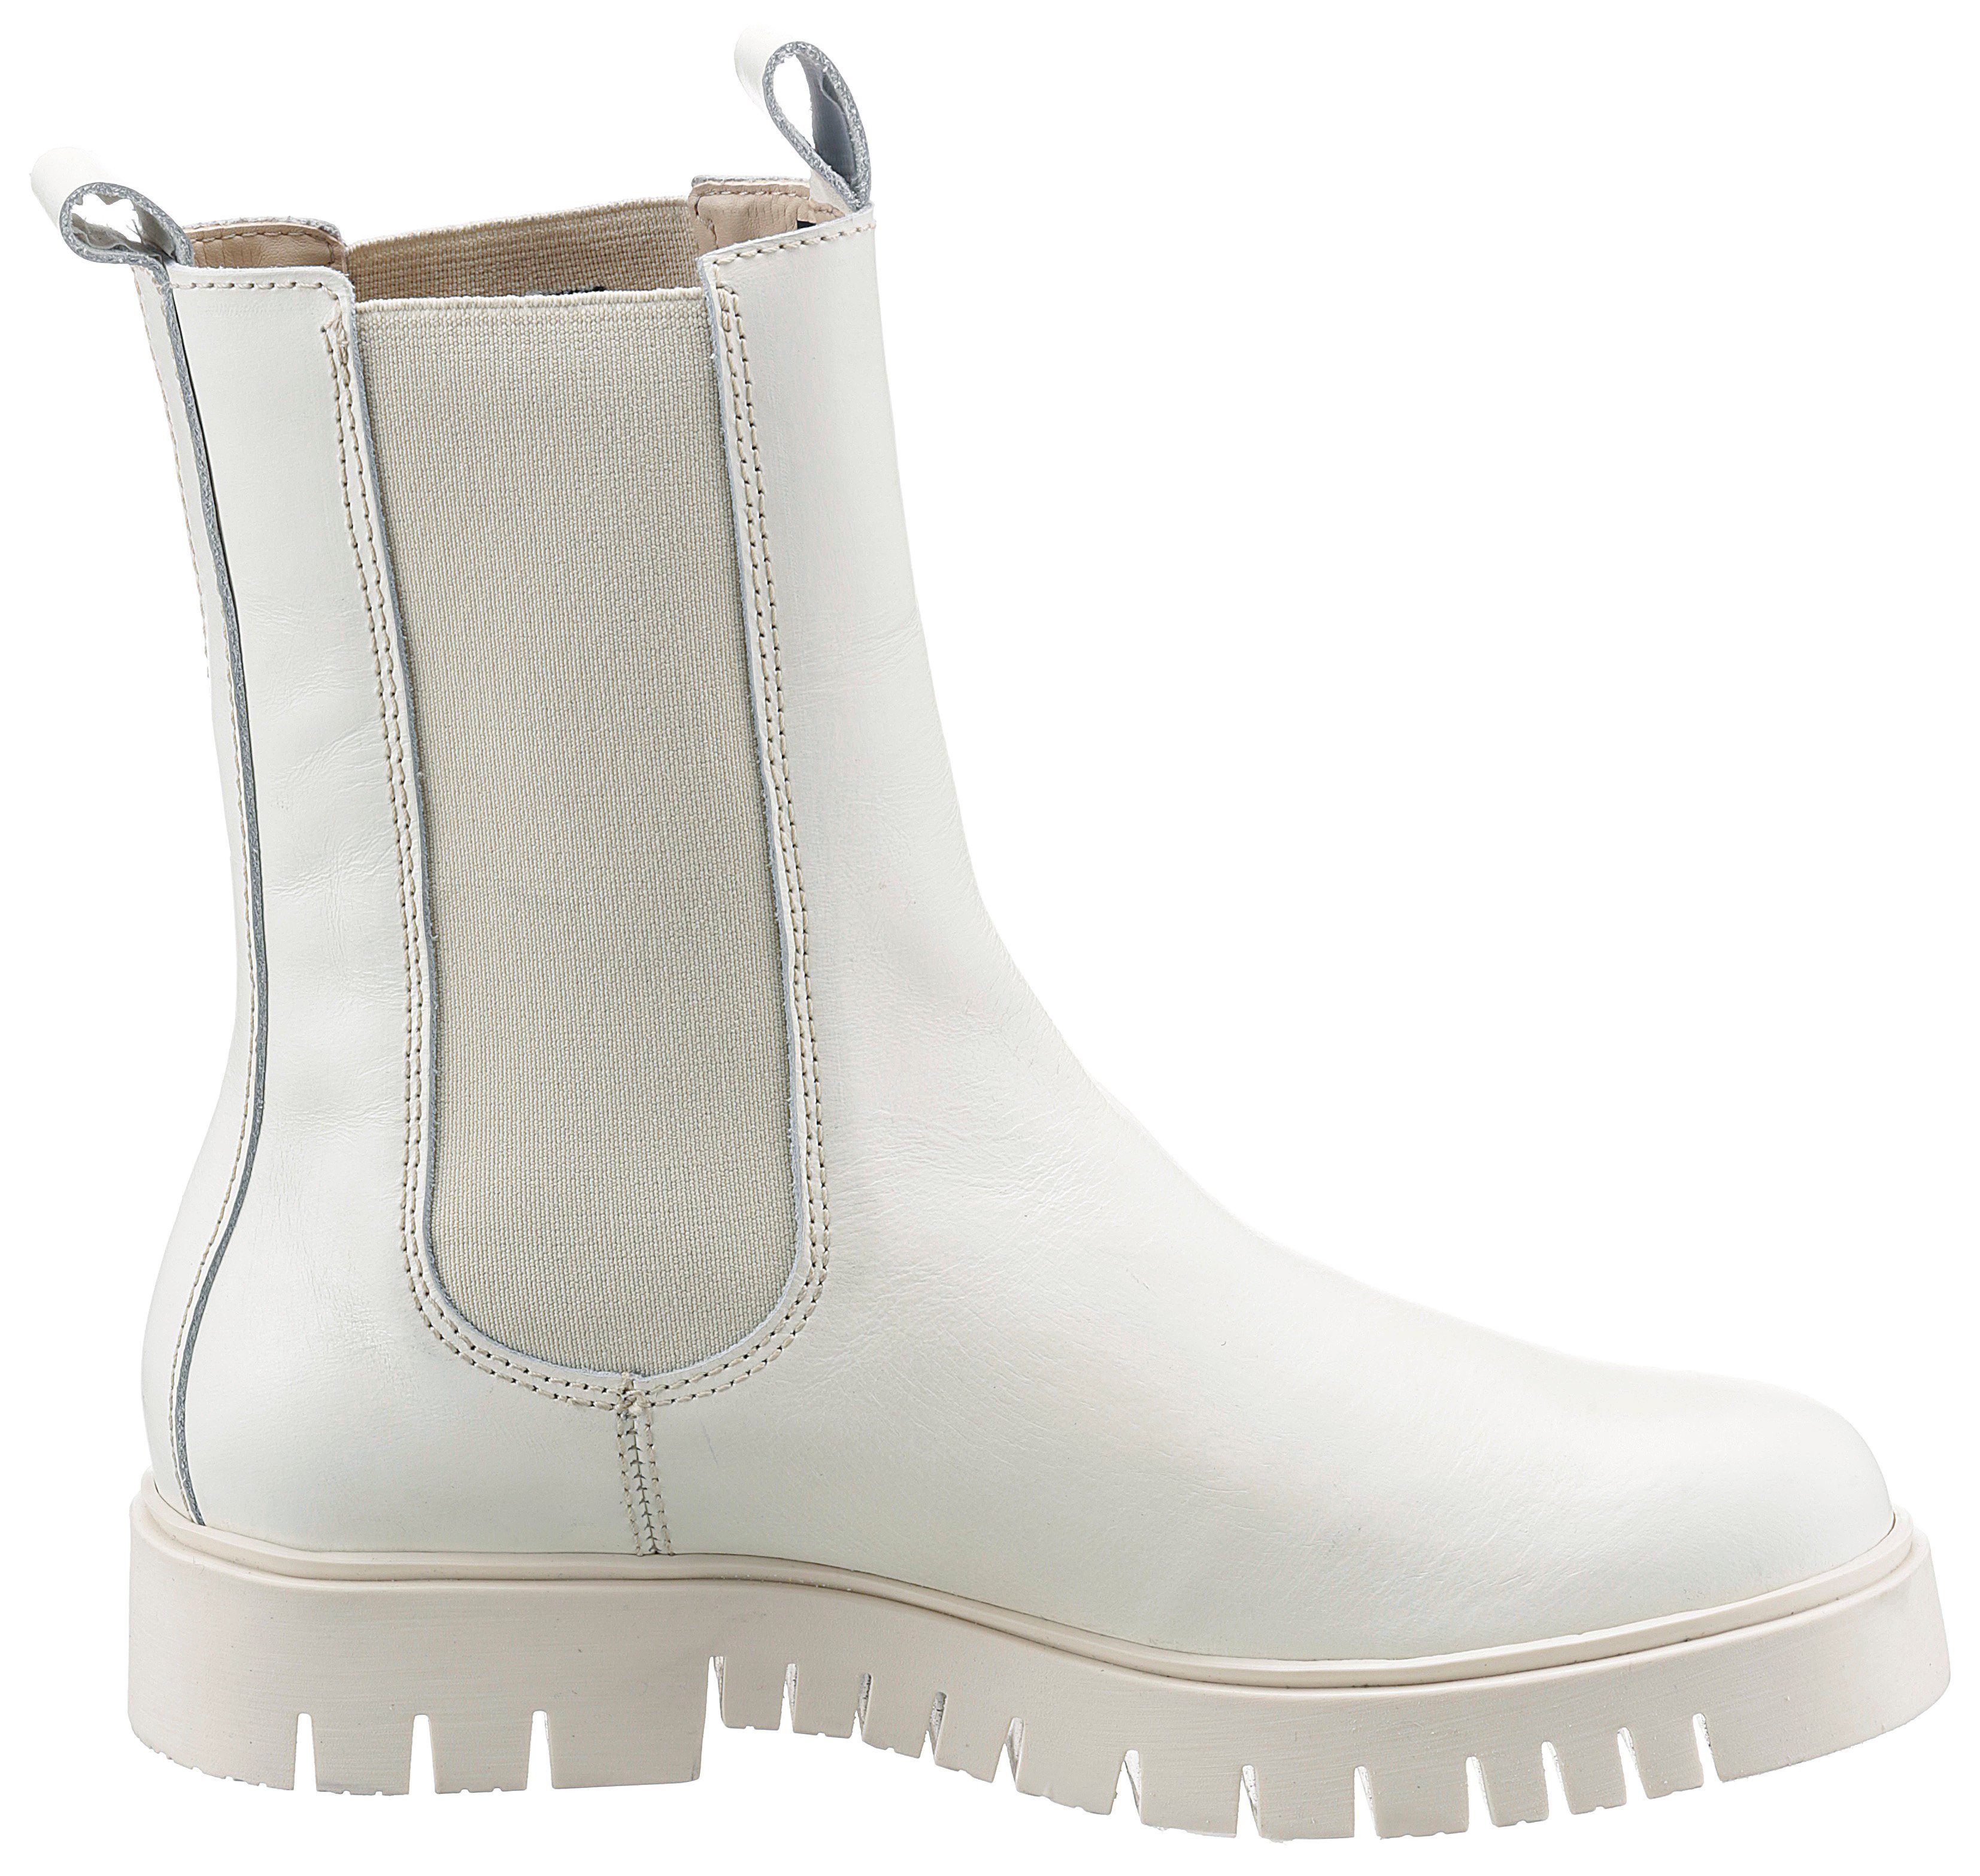 TOMMY offwhite JEANS Jeans beidseitigem CHELSEA Stretcheinsatz Chelseaboots mit Tommy BOOT LONG